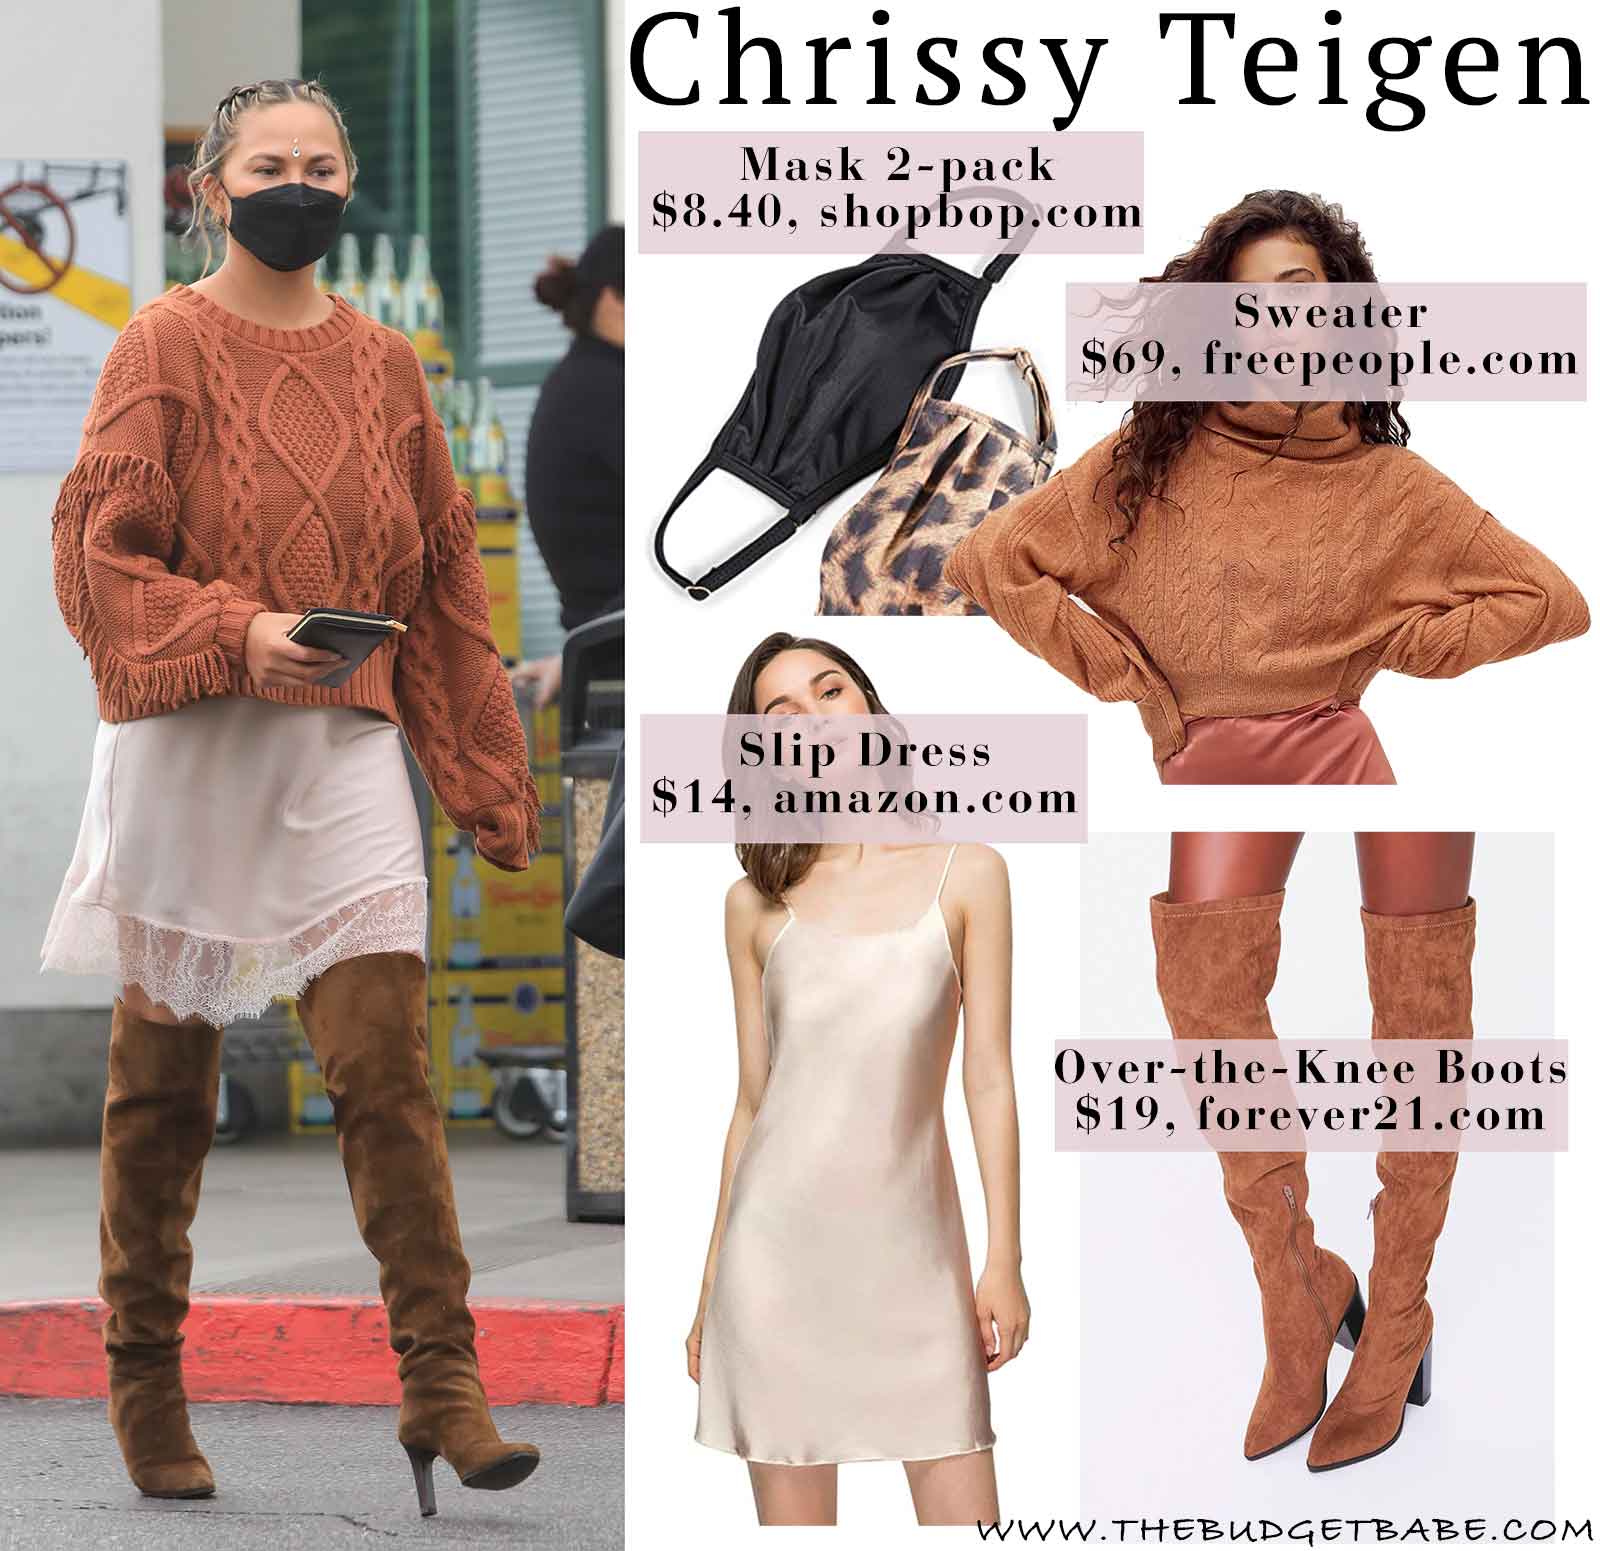 Chrissy Teigen's slip dress and over the knee boots look for less